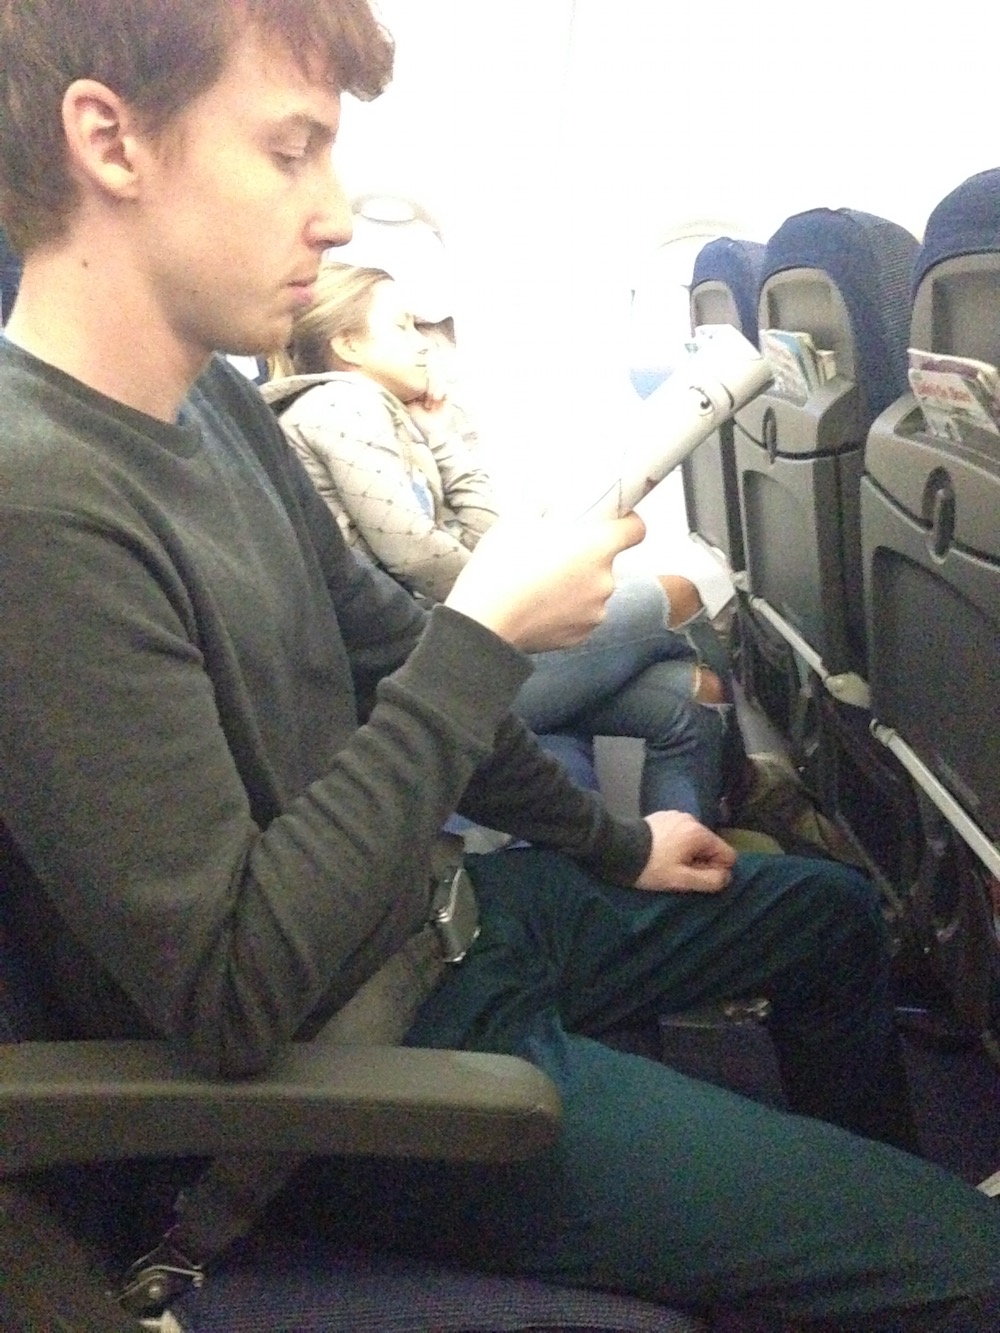 matthew-ross-on-airplane-with-girlfriend-leah